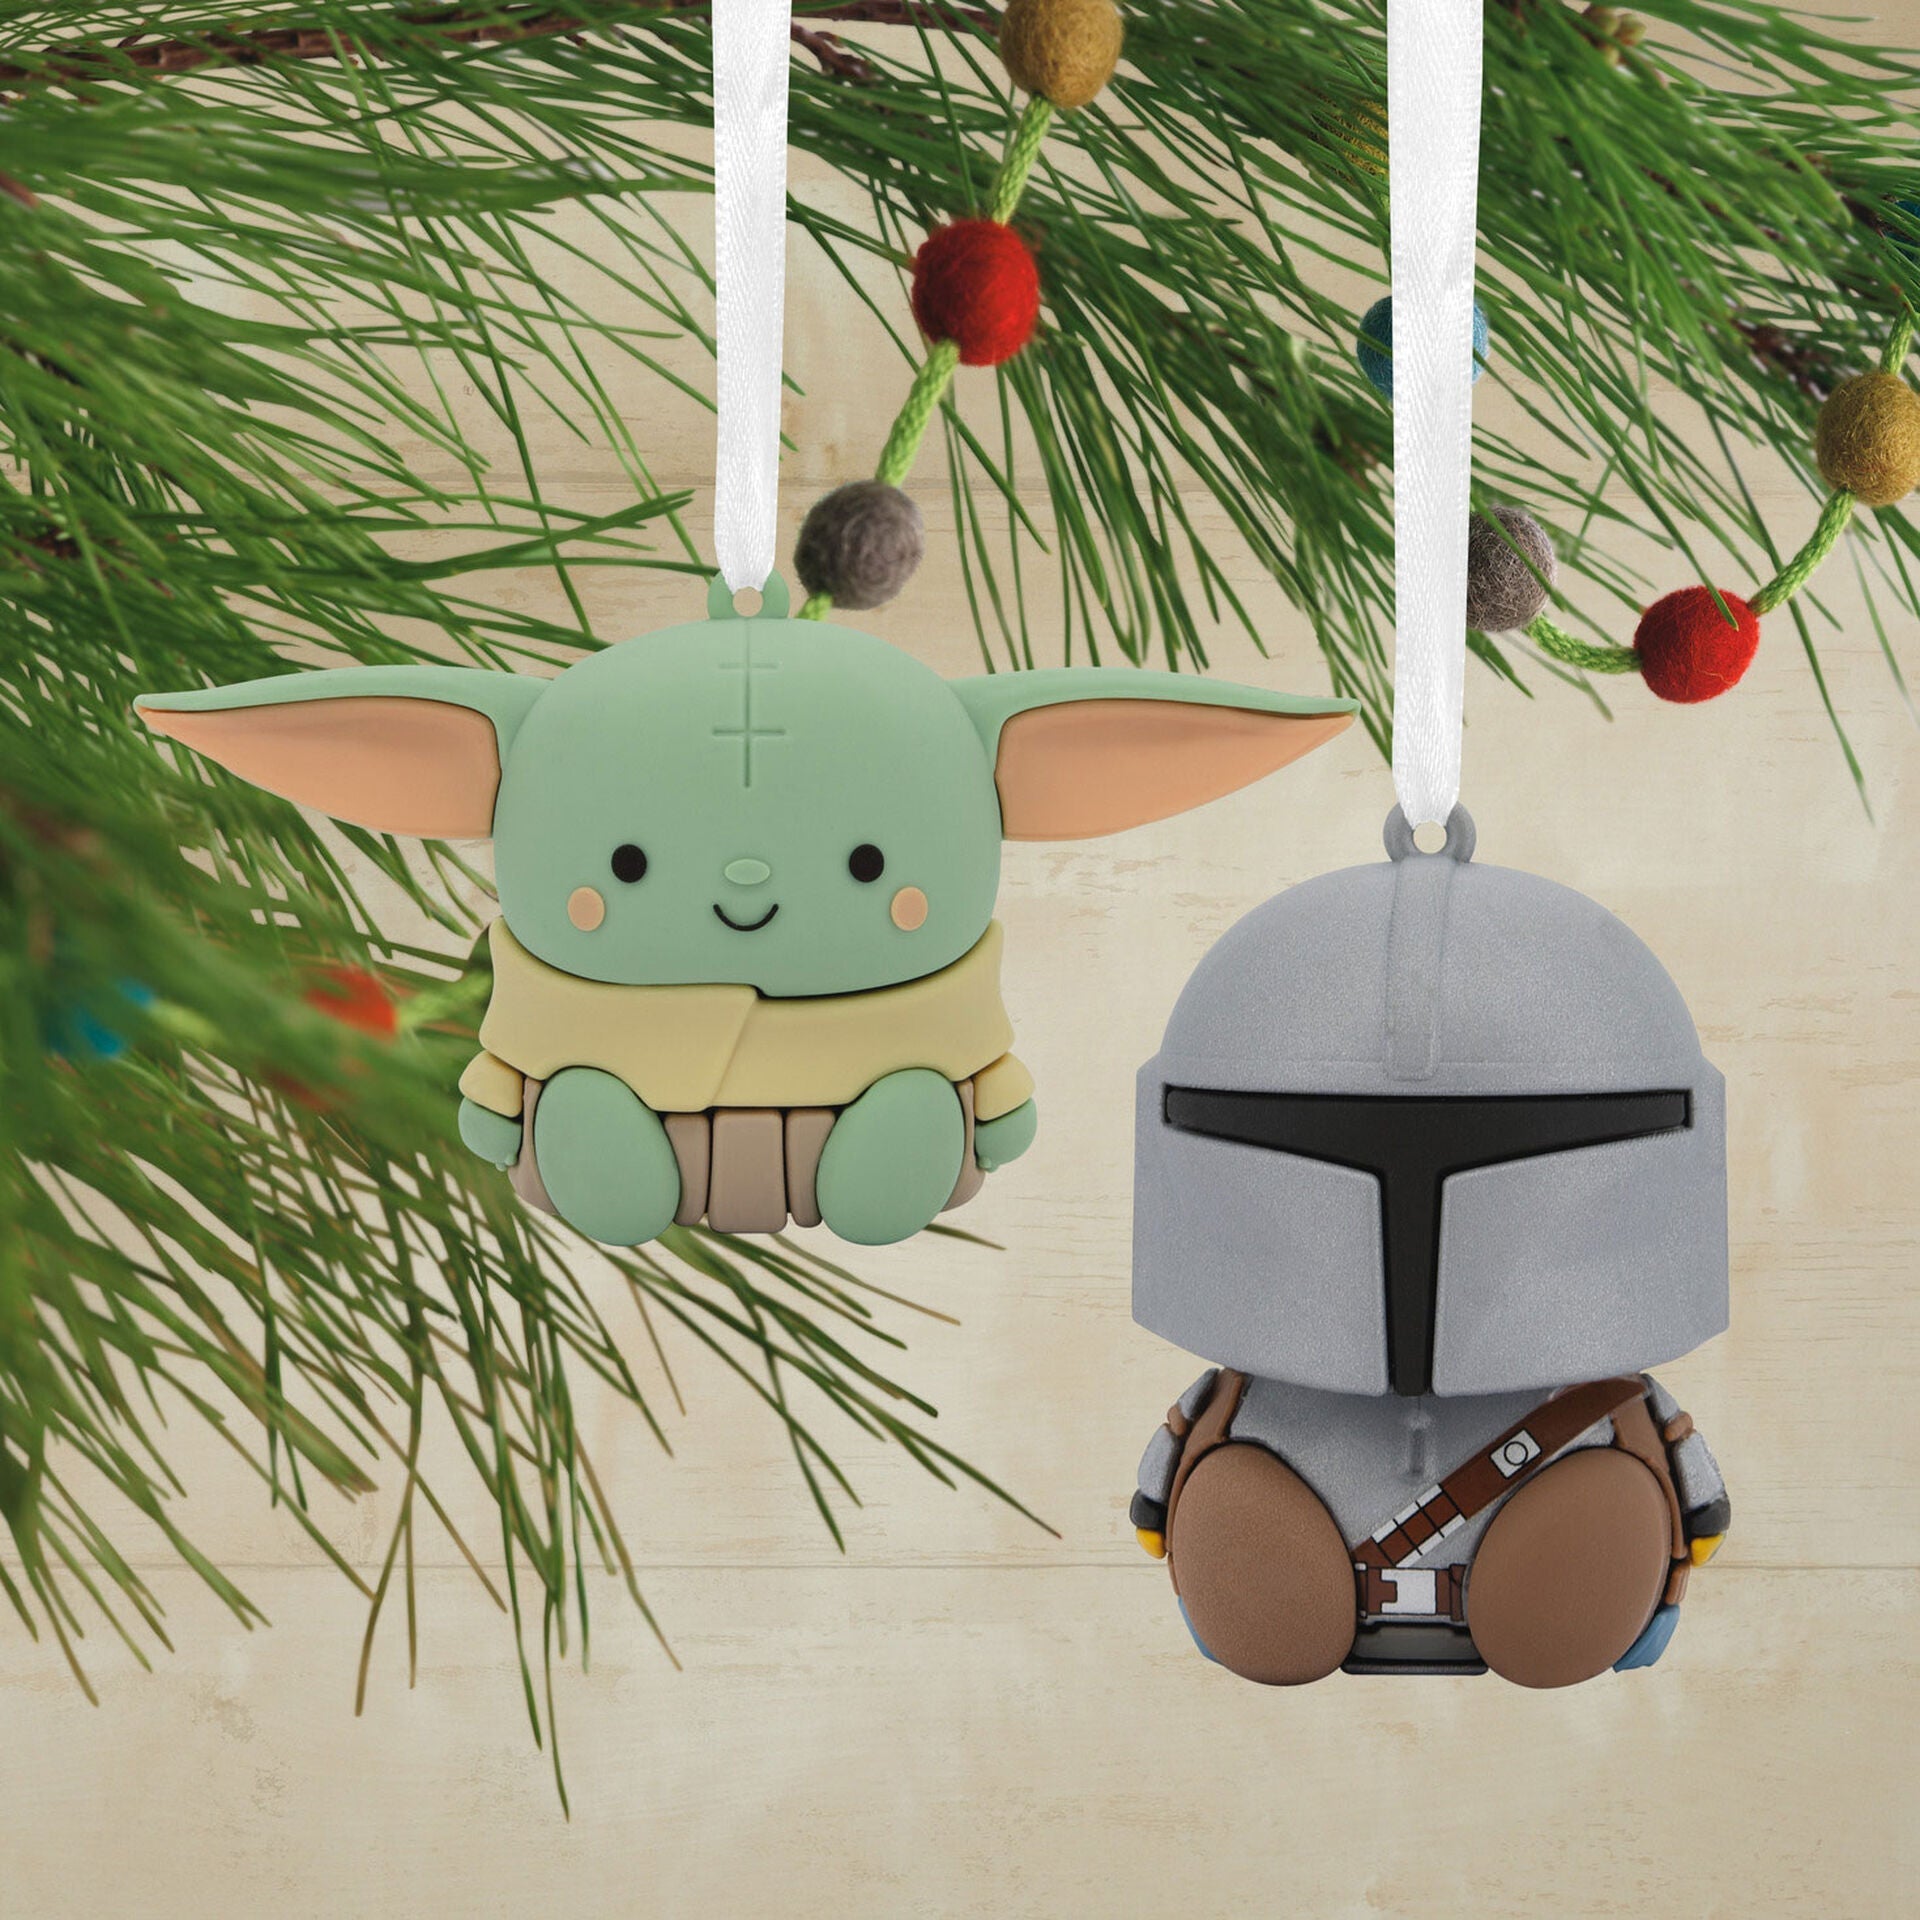 Better Together Star Wars: The Mandalorian™ and Grogu™ Magnetic Hallmark Ornaments, Set of 2